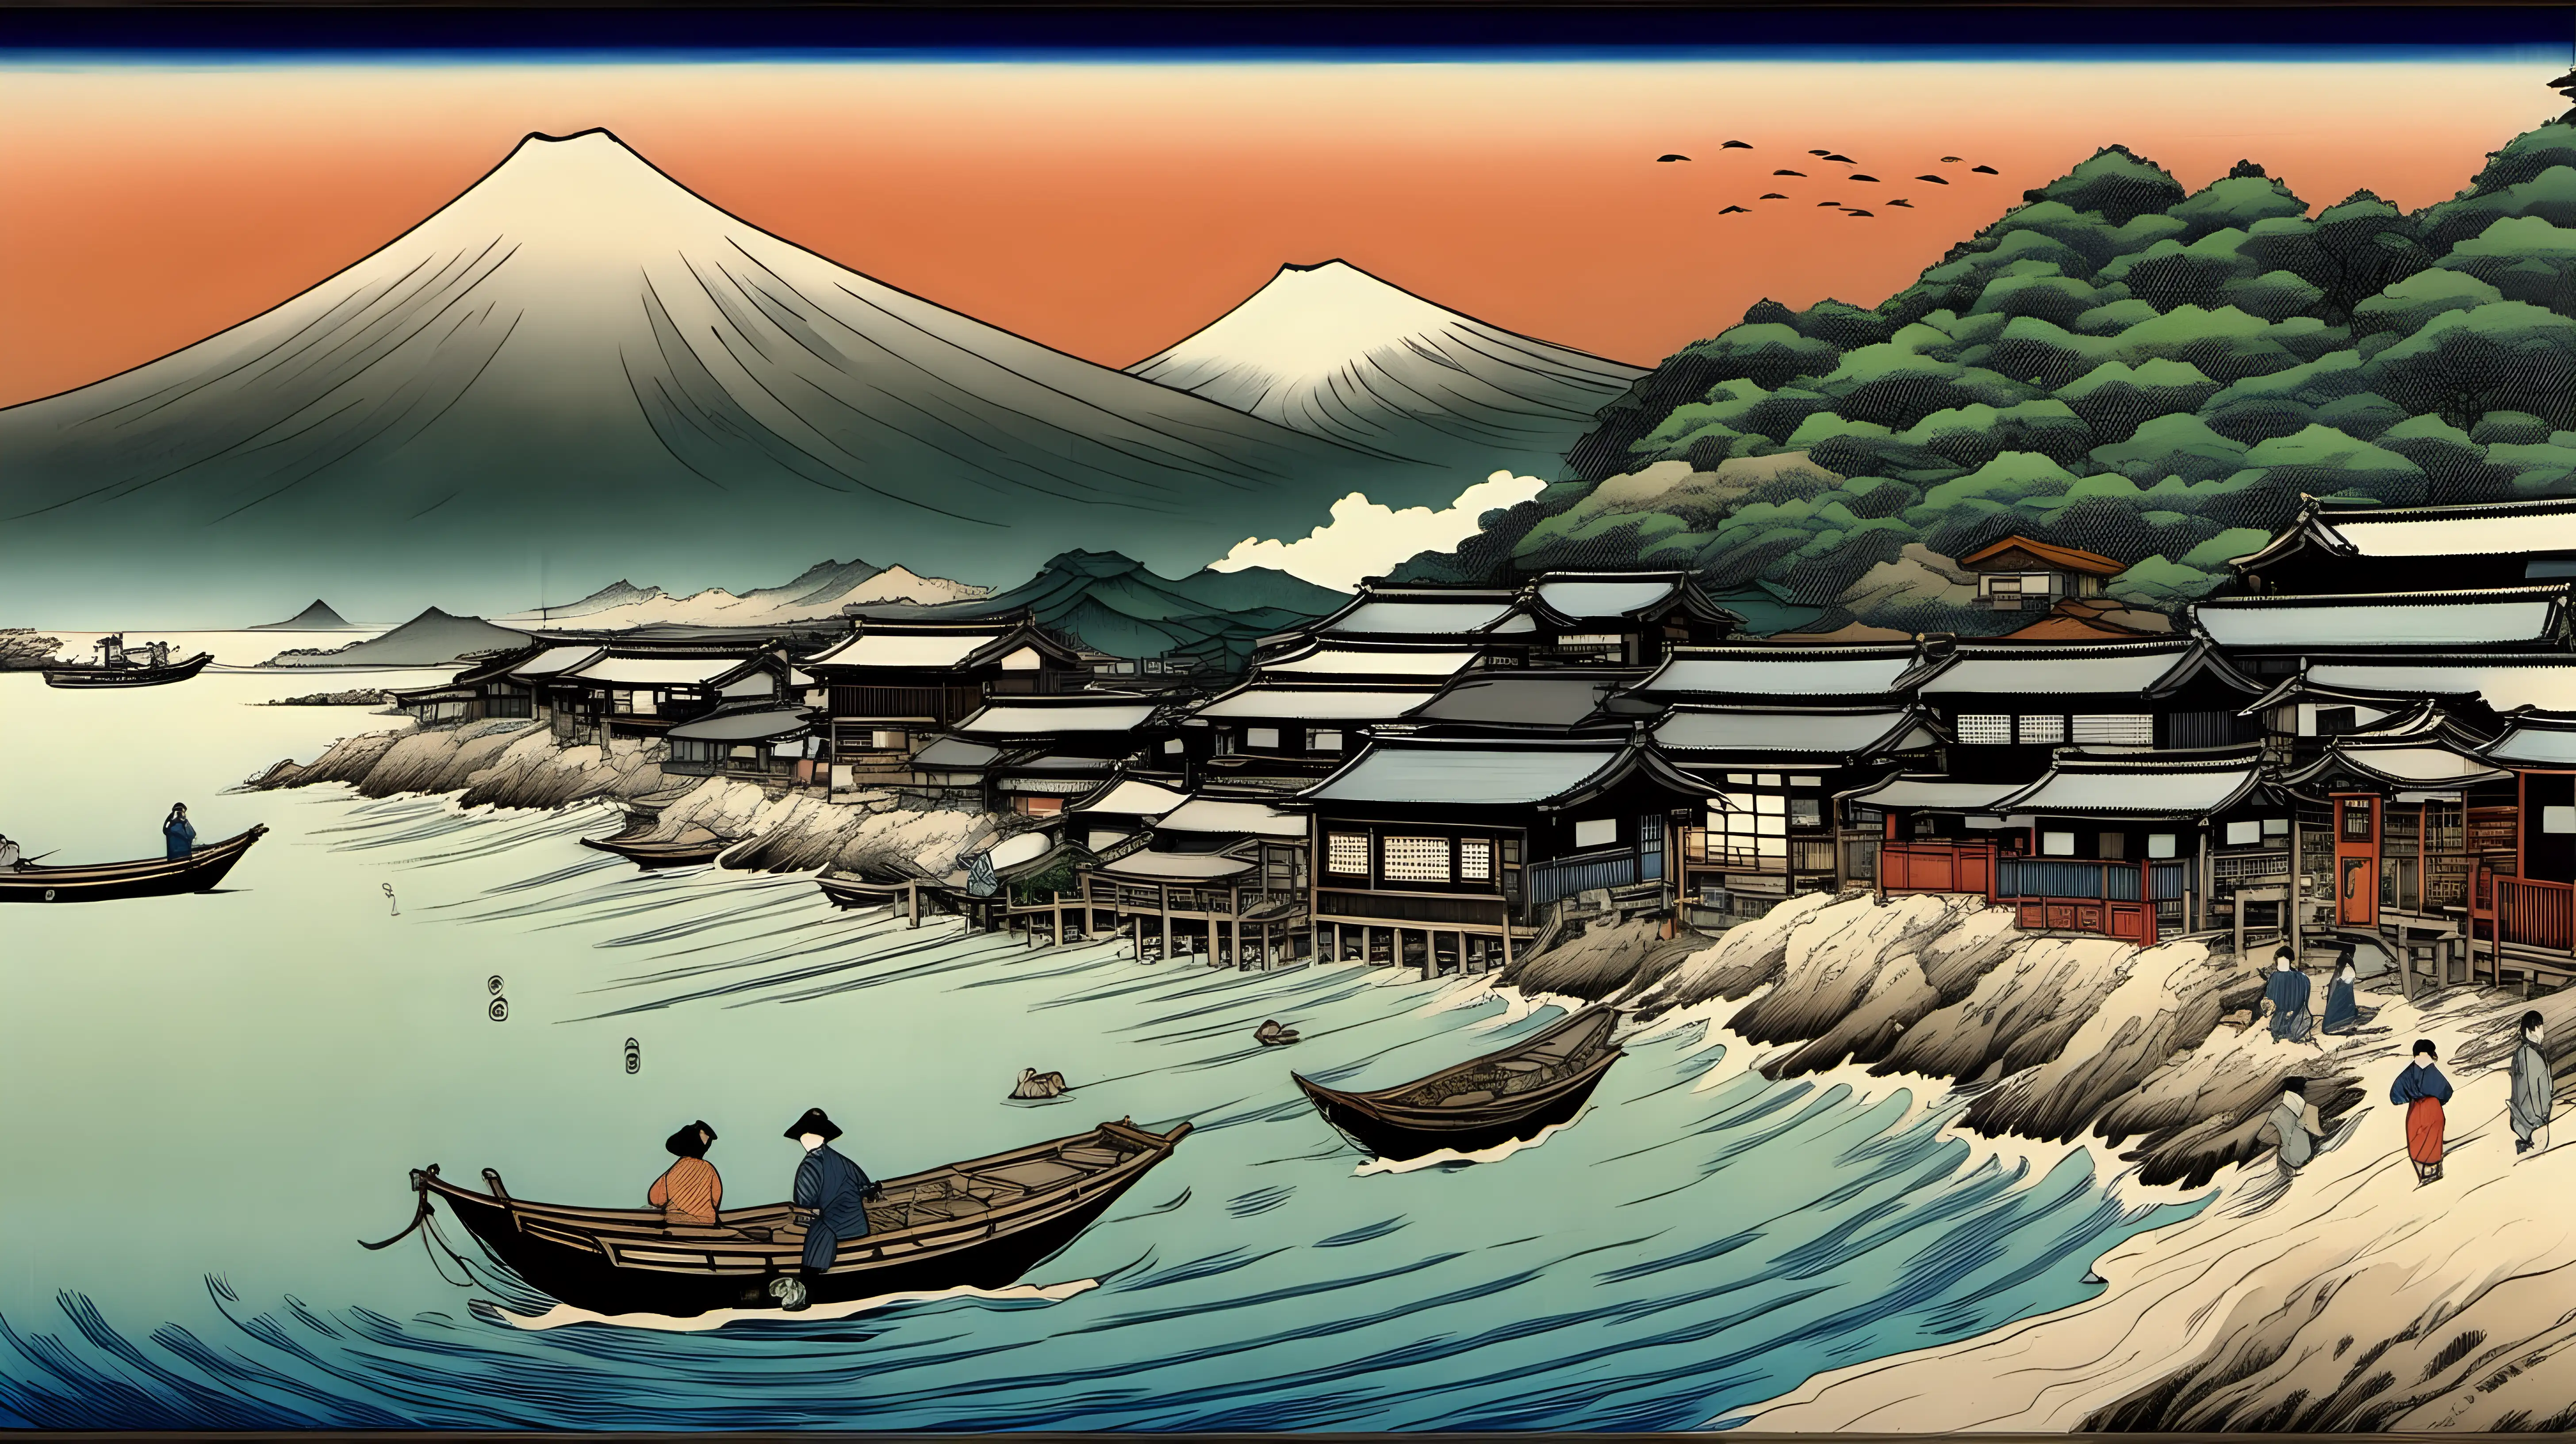 Ukiyo-e  Style painting of a fishing village by the sea. Detailed